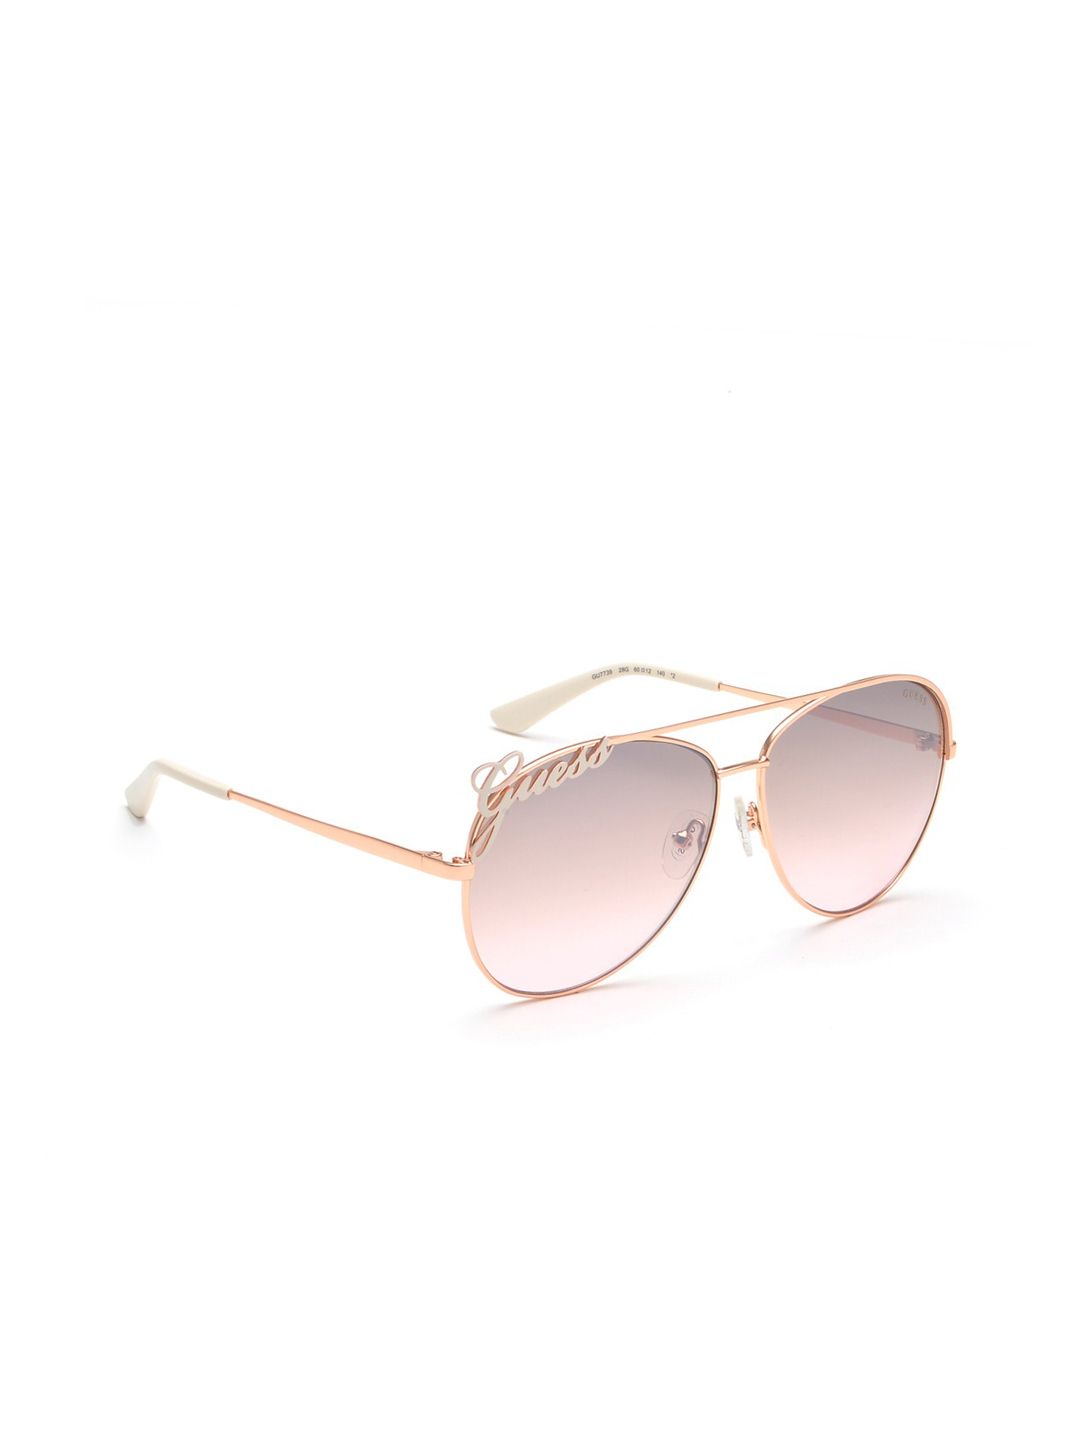 GUESS Women Grey Lens & Gold-Toned Aviator Sunglasses with Polarised Lens Price in India